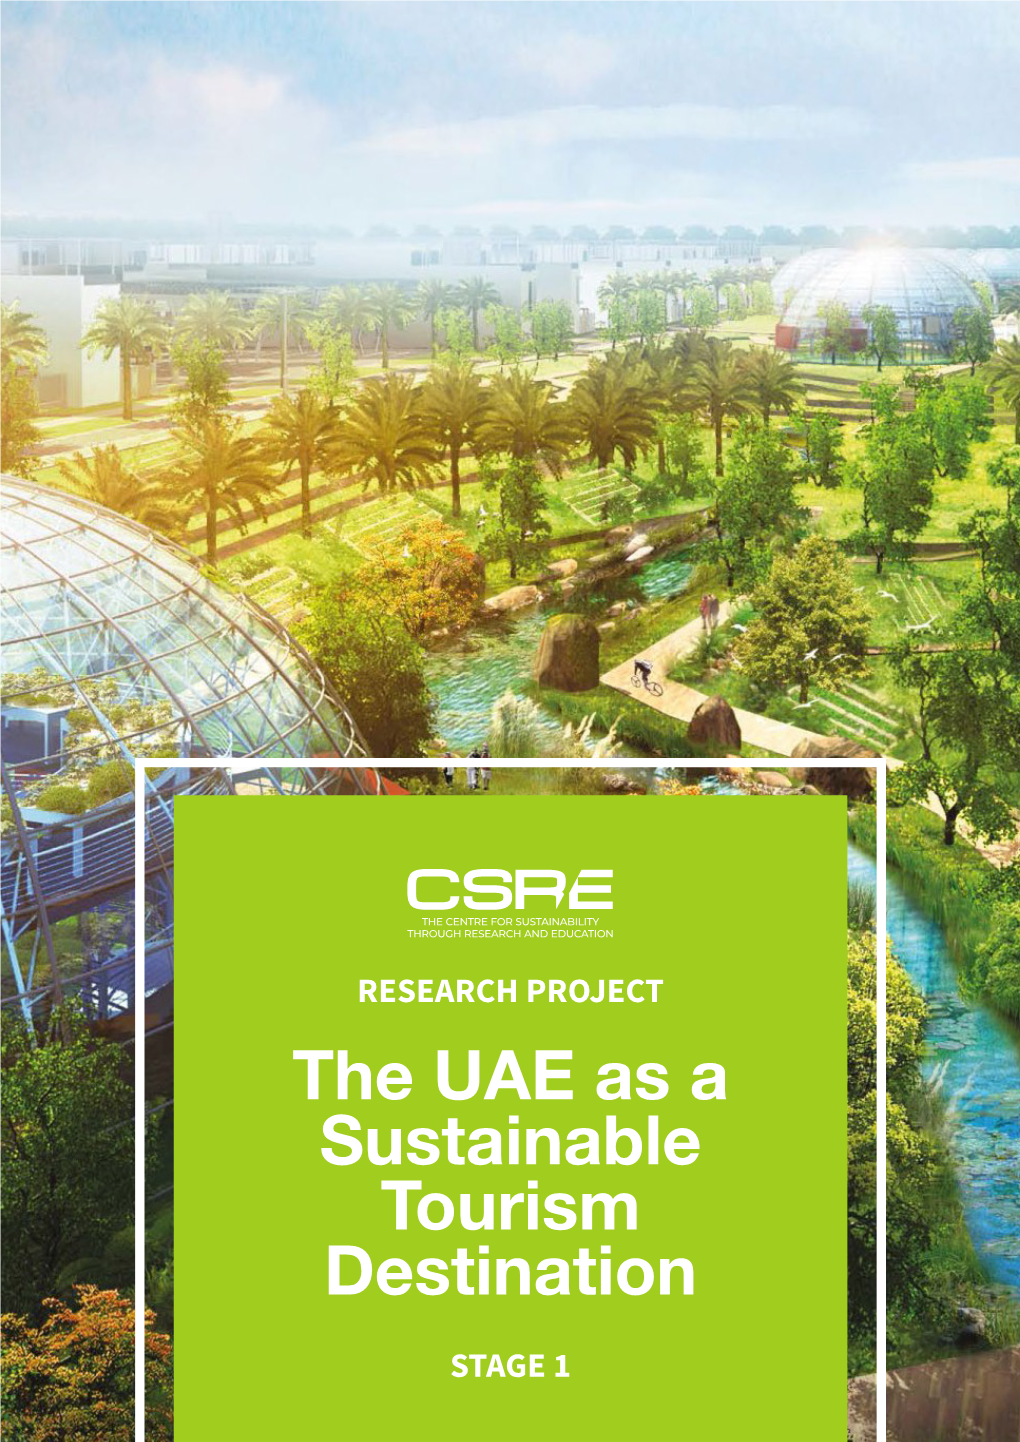 The UAE As a Sustainable Tourism Destination STAGE 1 the CENTRE for SUSTAINABILITY THROUGH RESEARCH & EDUCATION